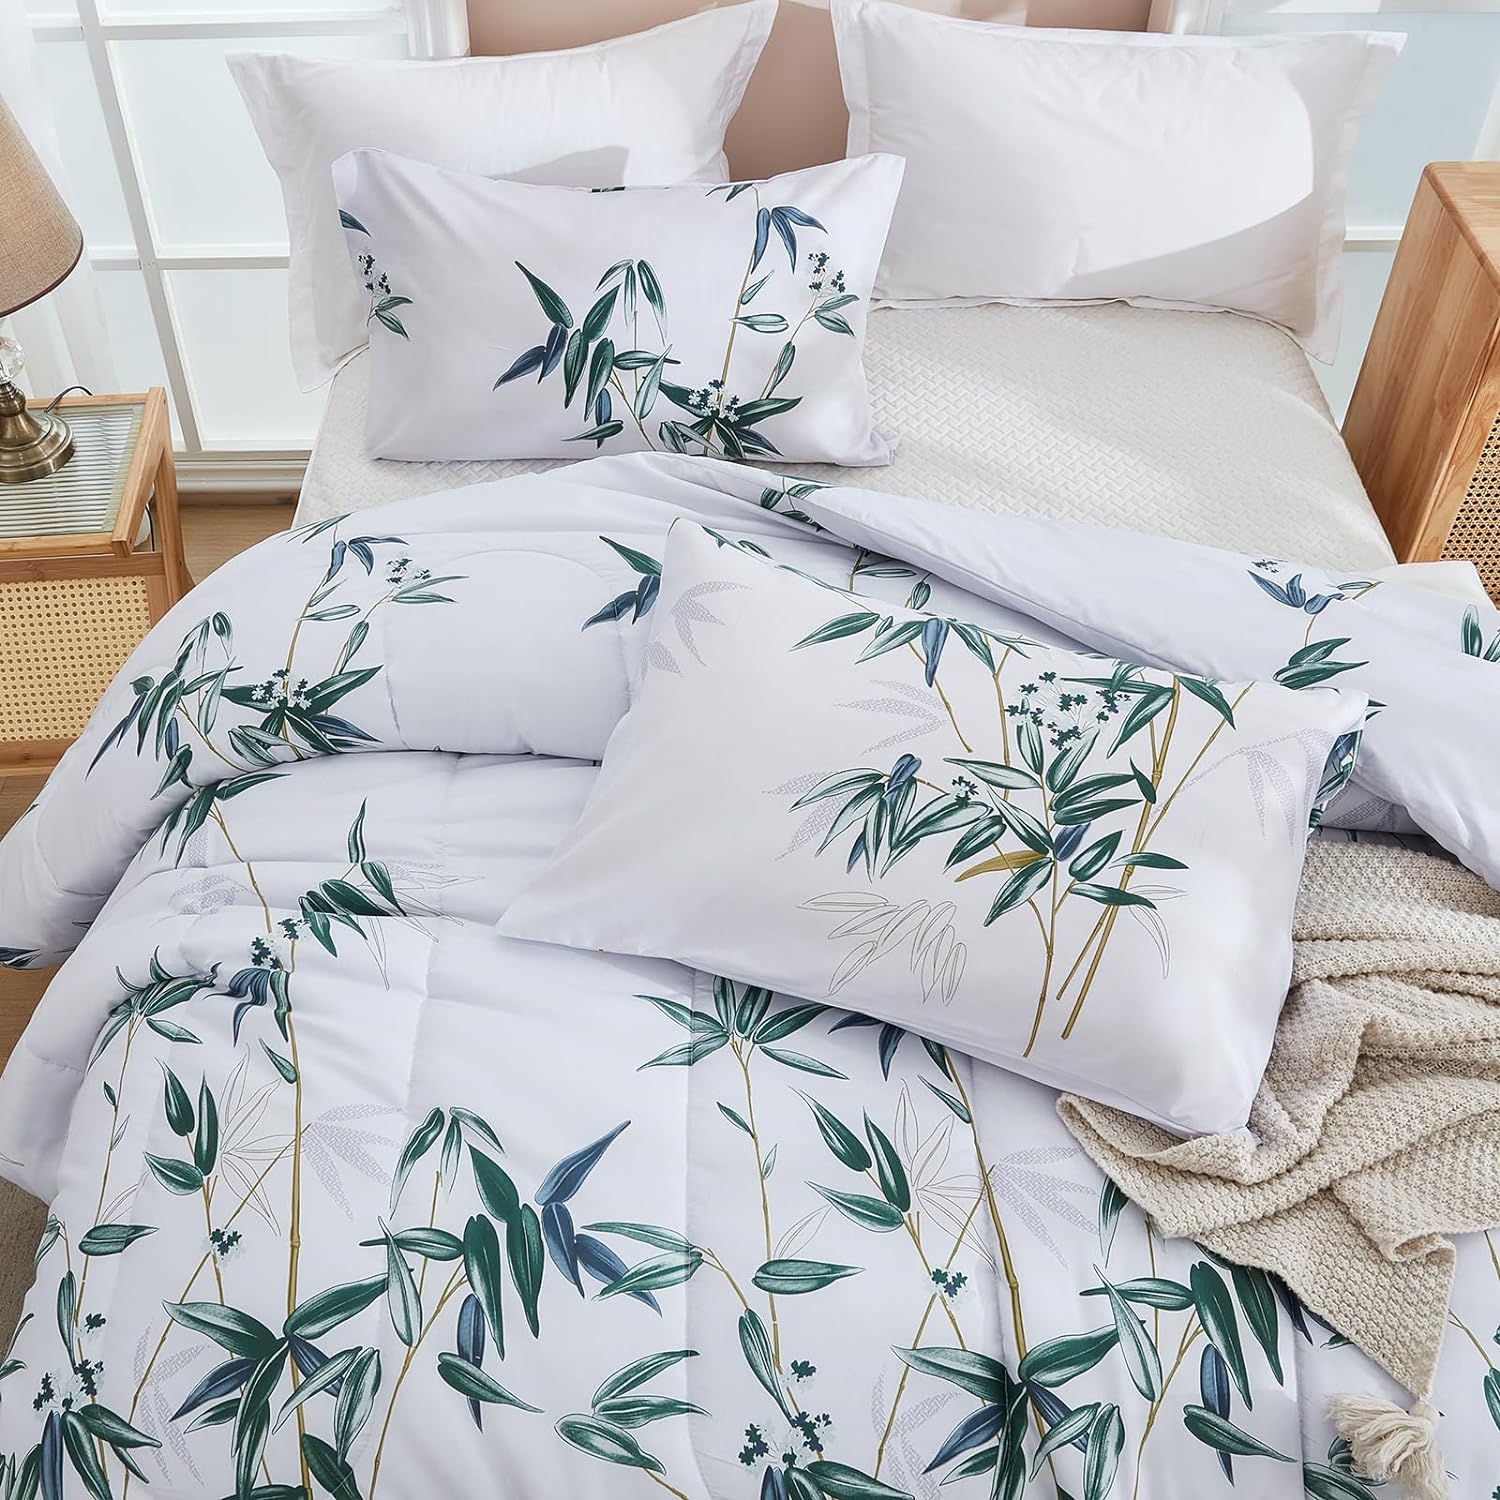 Bedbay Bamboo Print Comforter Set Queen Size Bamboo Leaf Bedding Boys Girls Botanical Floral Bedding 3 Pieces Soft Breathable Cozy Comforter Blue Queen Aesthetic Bedding Set